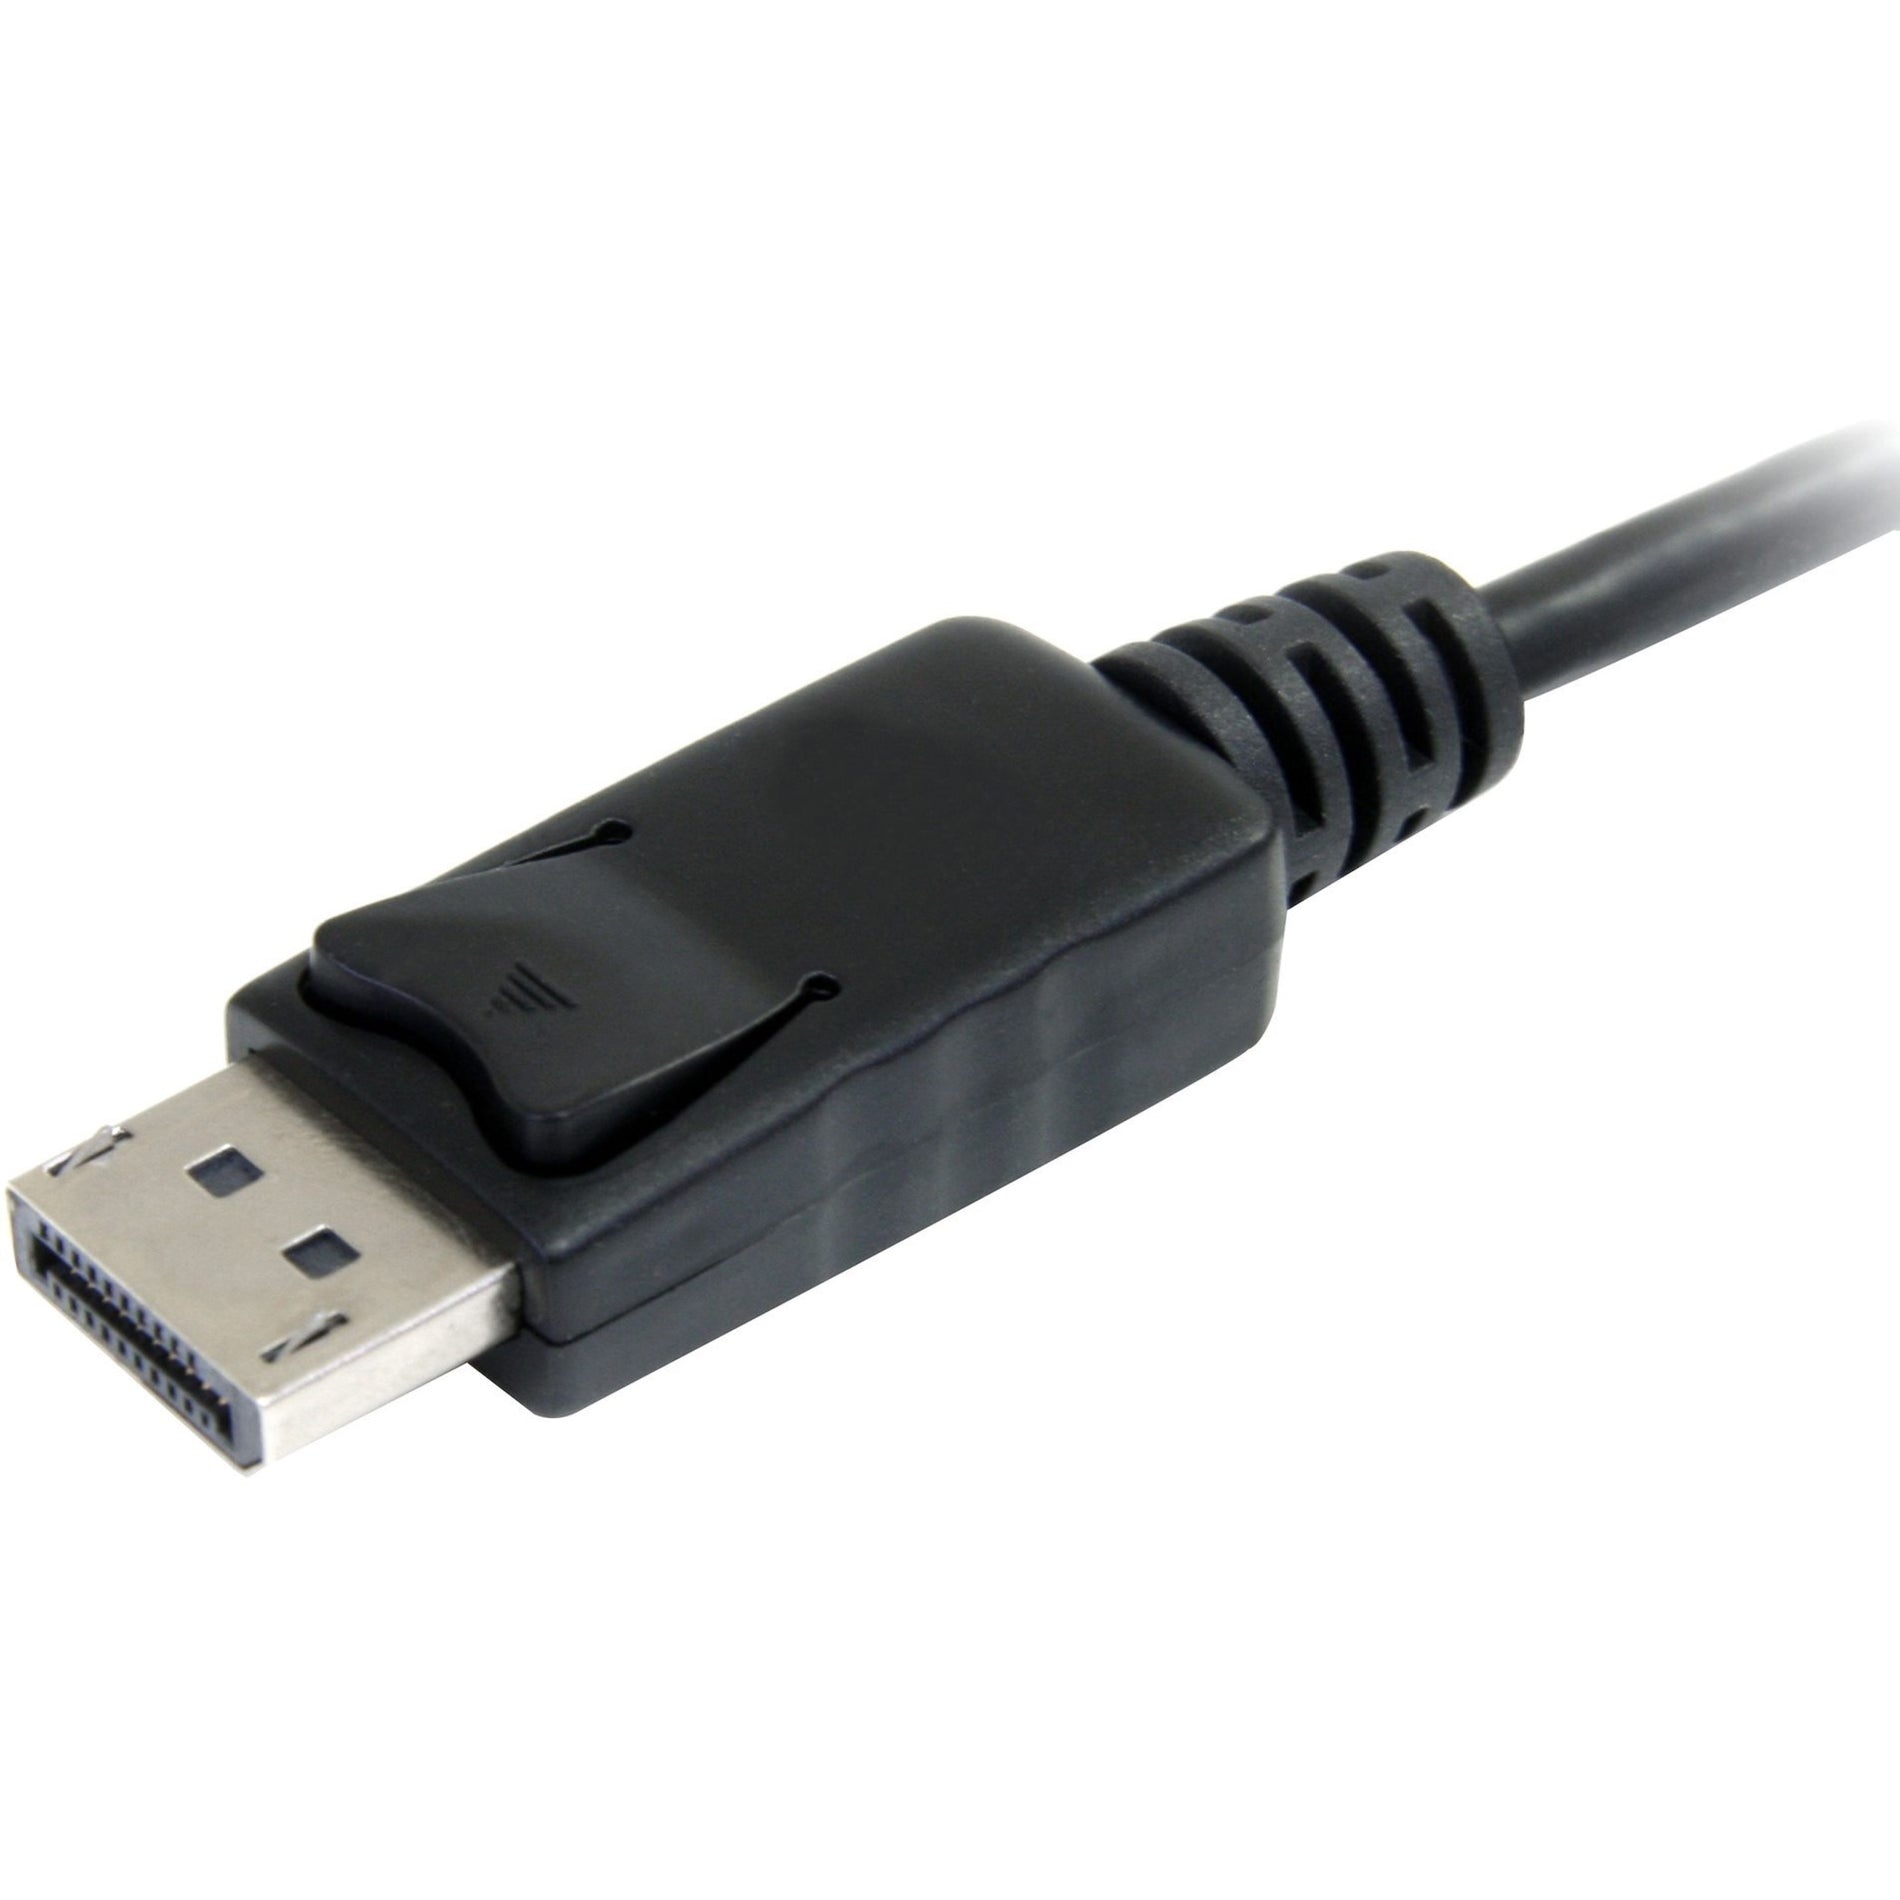 StarTech.com DP2MDPMF6IN 6in DisplayPort to Mini DisplayPort Cable Adapter, Latching Connector, Strain Relief, Molded